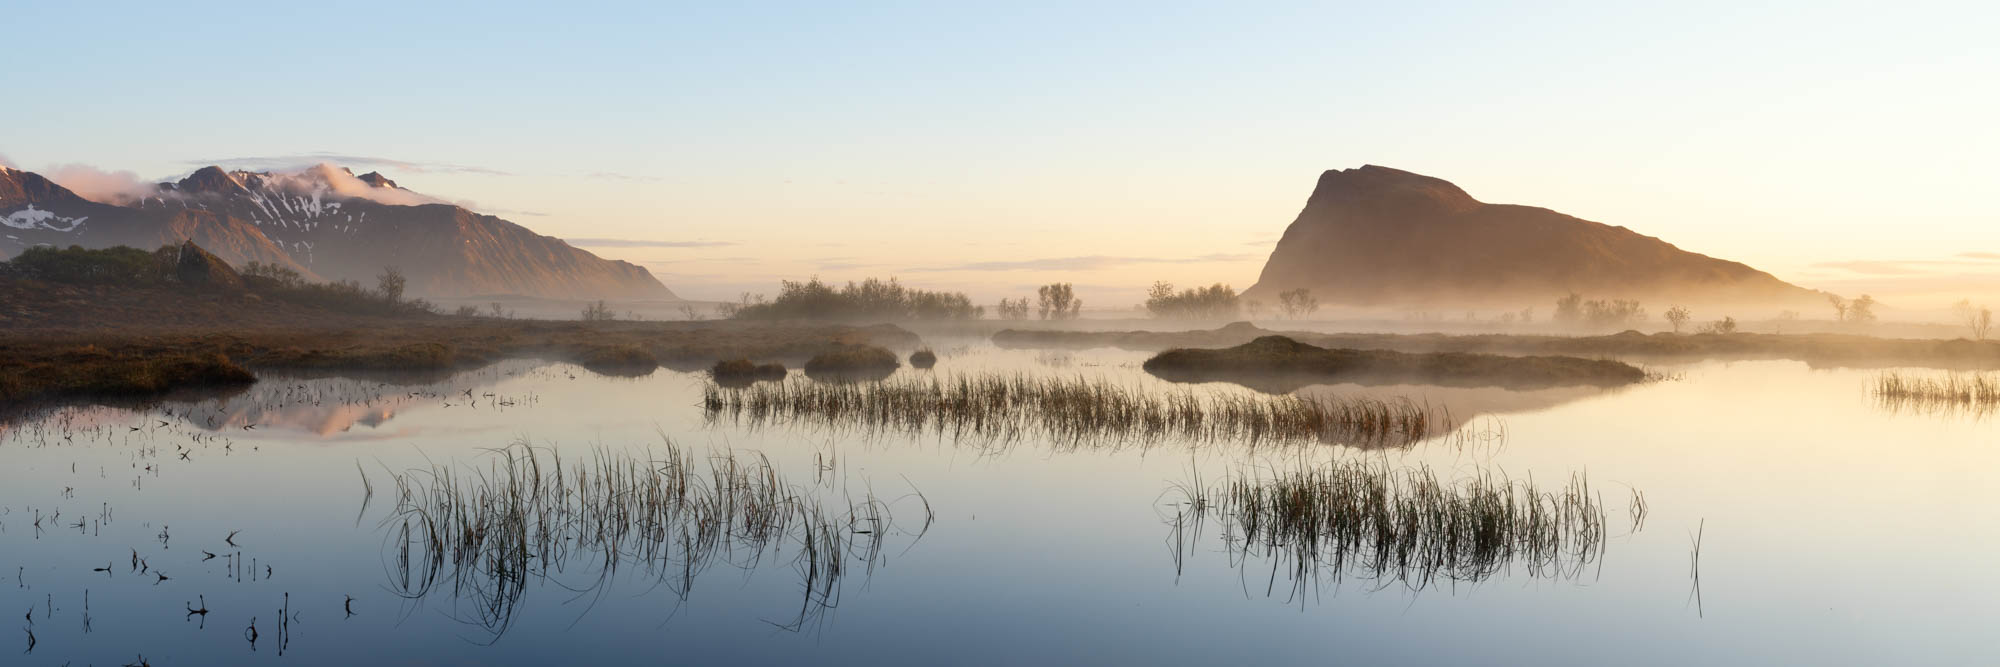 Panorama of a lake and Hoven mountain revealed in the mist in Gimsøymyrene nature reserve on Gimsøy Island in the Lofoten Islands during the midnight sun